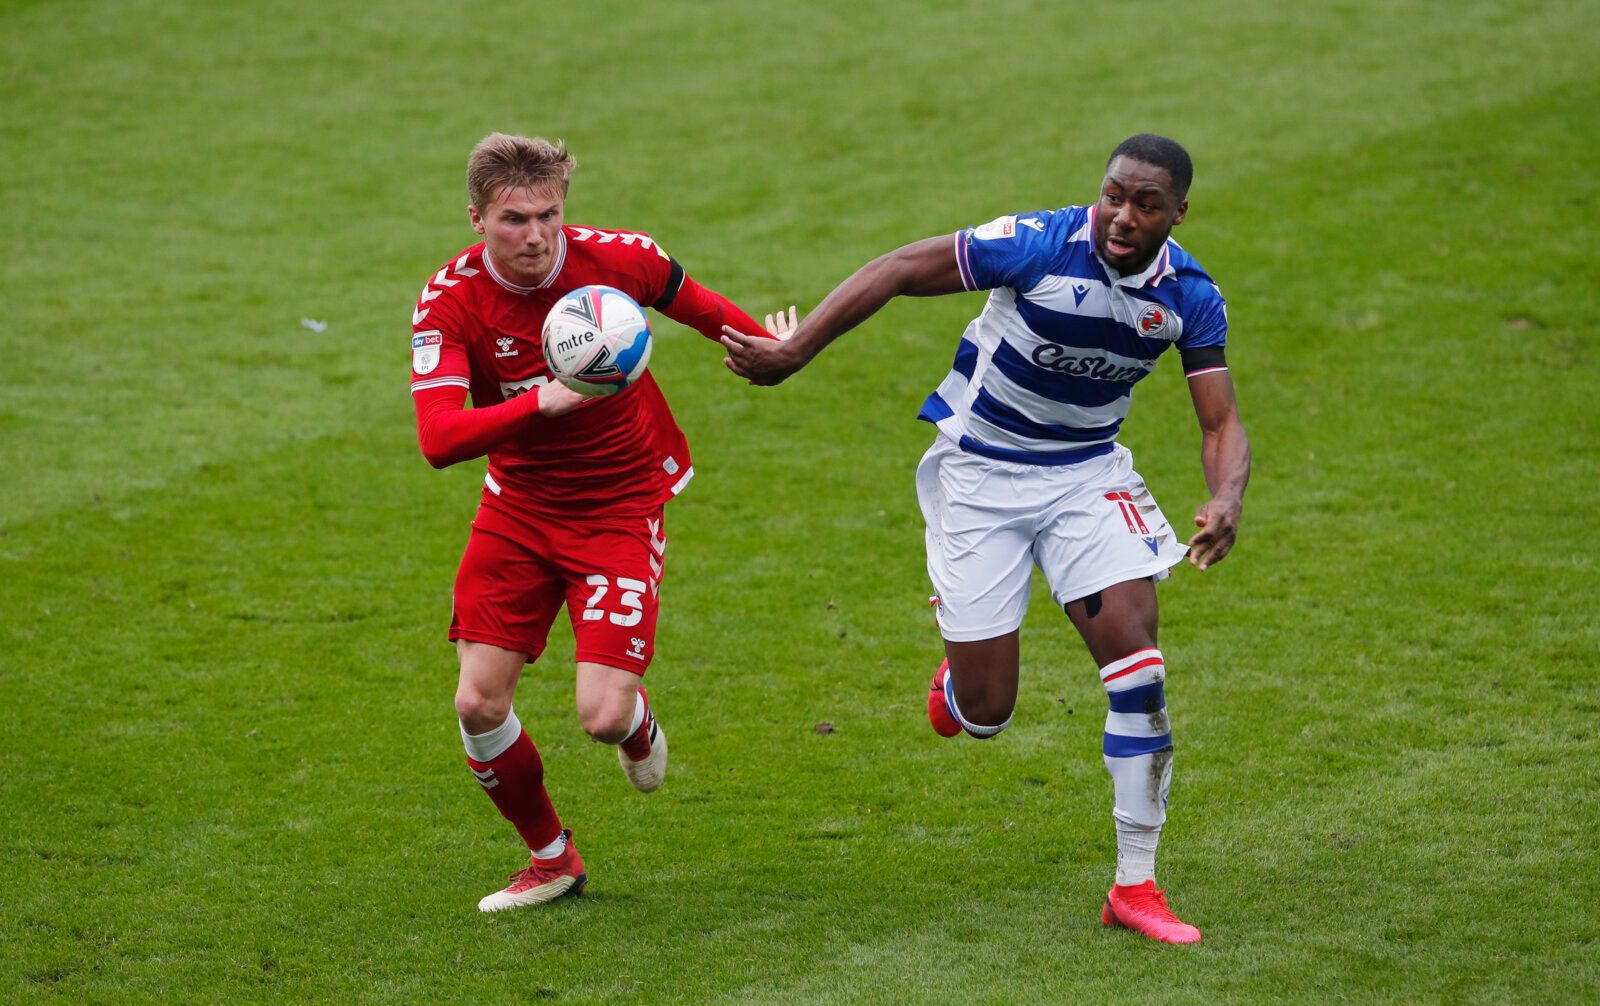 Soccer Football - Championship - Reading v Bristol City - Madejski Stadium, Reading, Britain - November 28, 2020 Reading's Yakou  Meite in action with Bristol City's Taylor Moore Action Images/Andrew Couldridge EDITORIAL USE ONLY. No use with unauthorized audio, video, data, fixture lists, club/league logos or 'live' services. Online in-match use limited to 75 images, no video emulation. No use in betting, games or single club /league/player publications.  Please contact your account representat